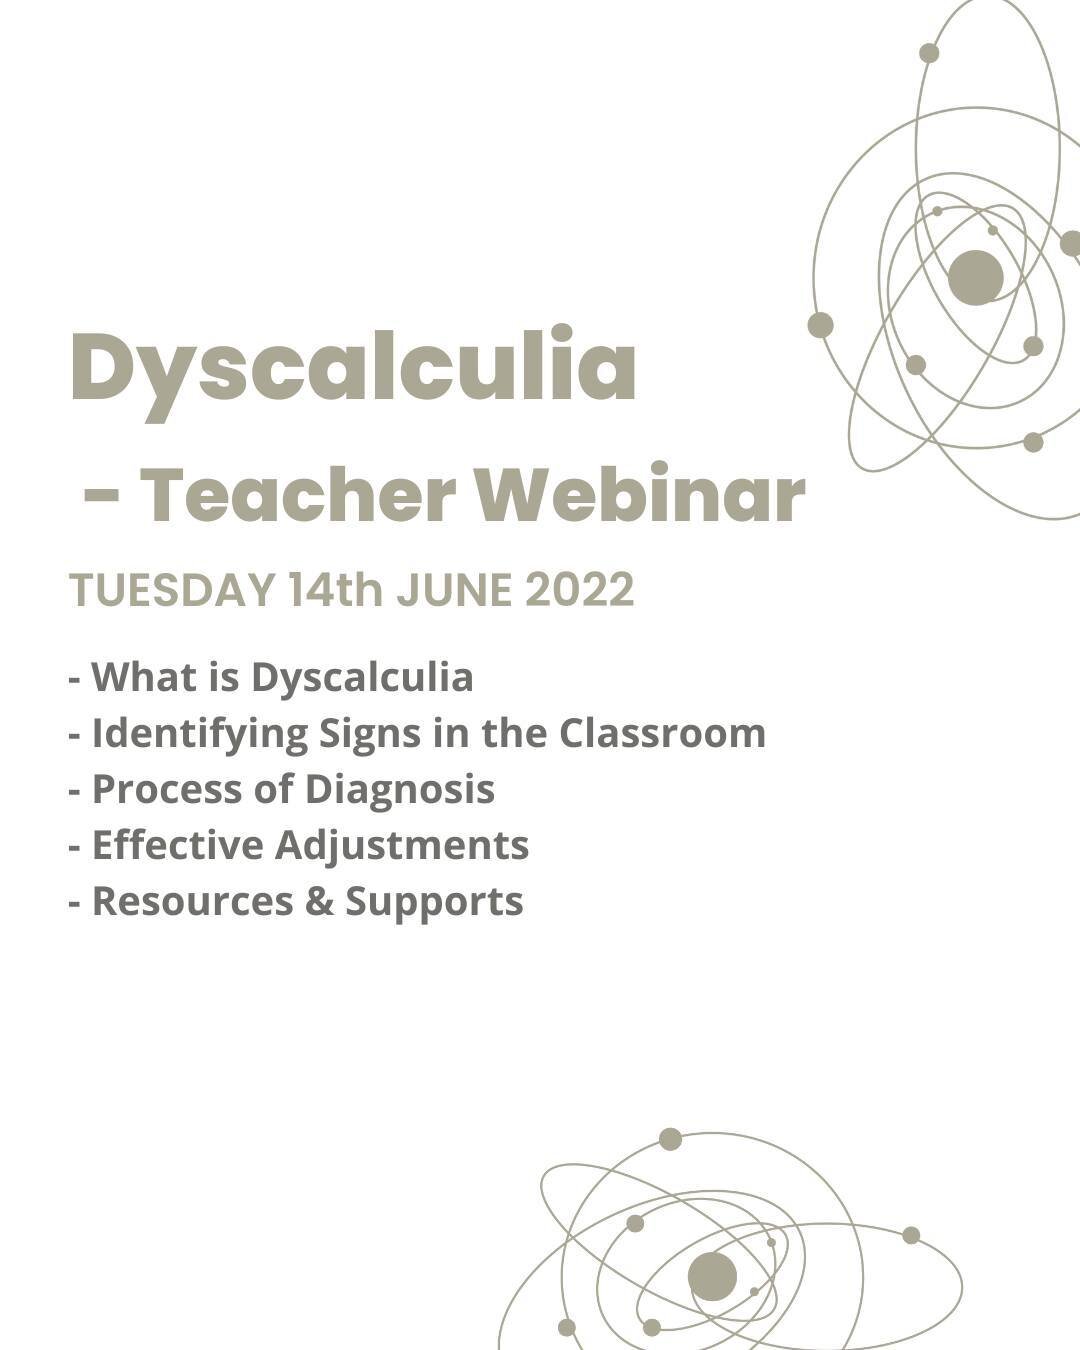 Dyscalculia - Teacher Webinar Package $53.99
Launches 14th June - buy tickets today! 

Packages includes:
- Unlimited and Immediate Access to Webinar Recording
- Printable Presentation Slides
- Dyscalculia Effective Adjustments and Accommodations eBo